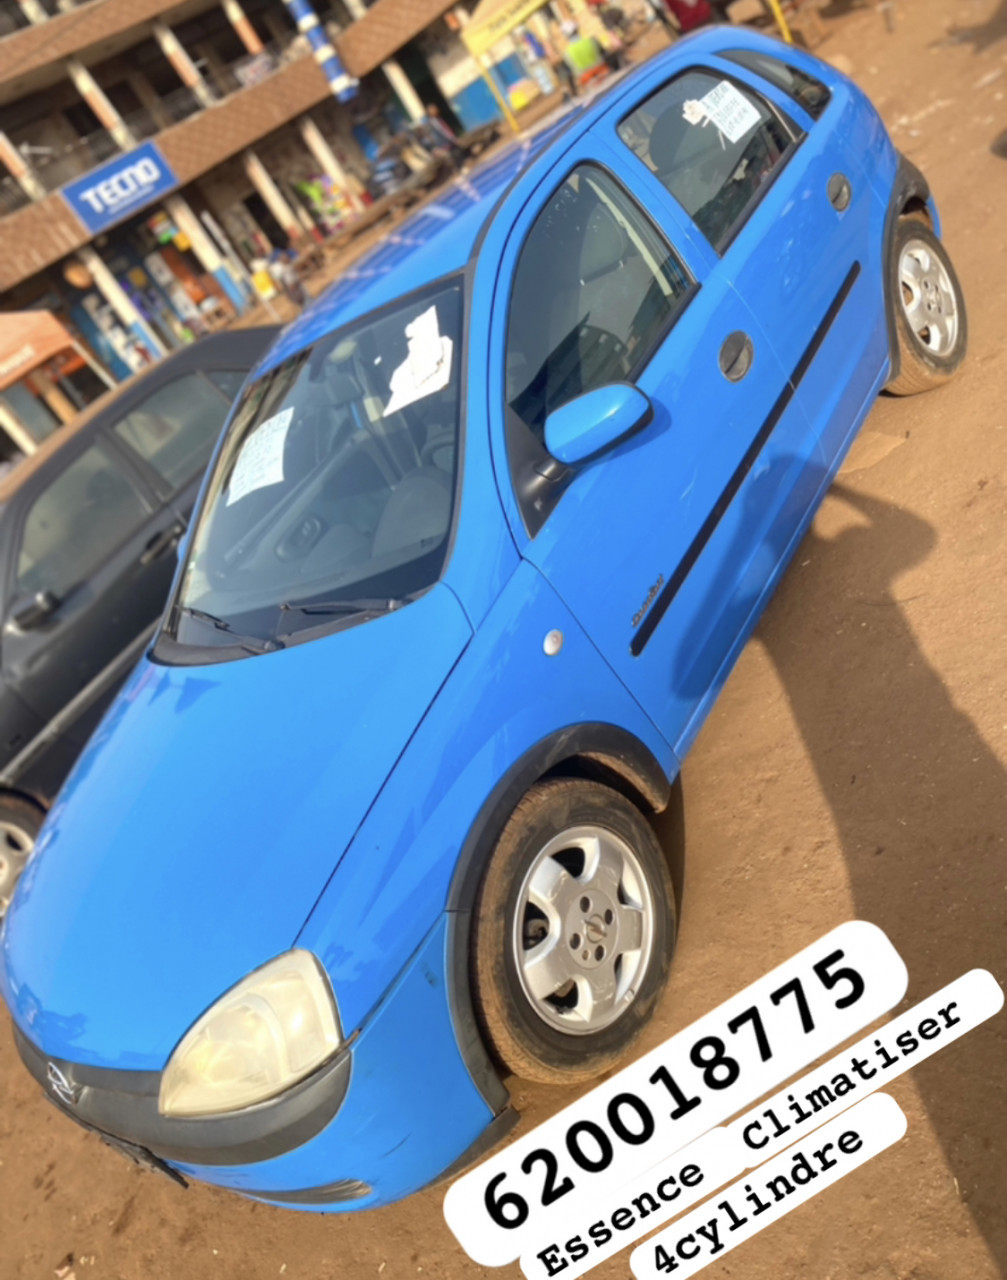 Opel Corsa, Voitures, Conakry